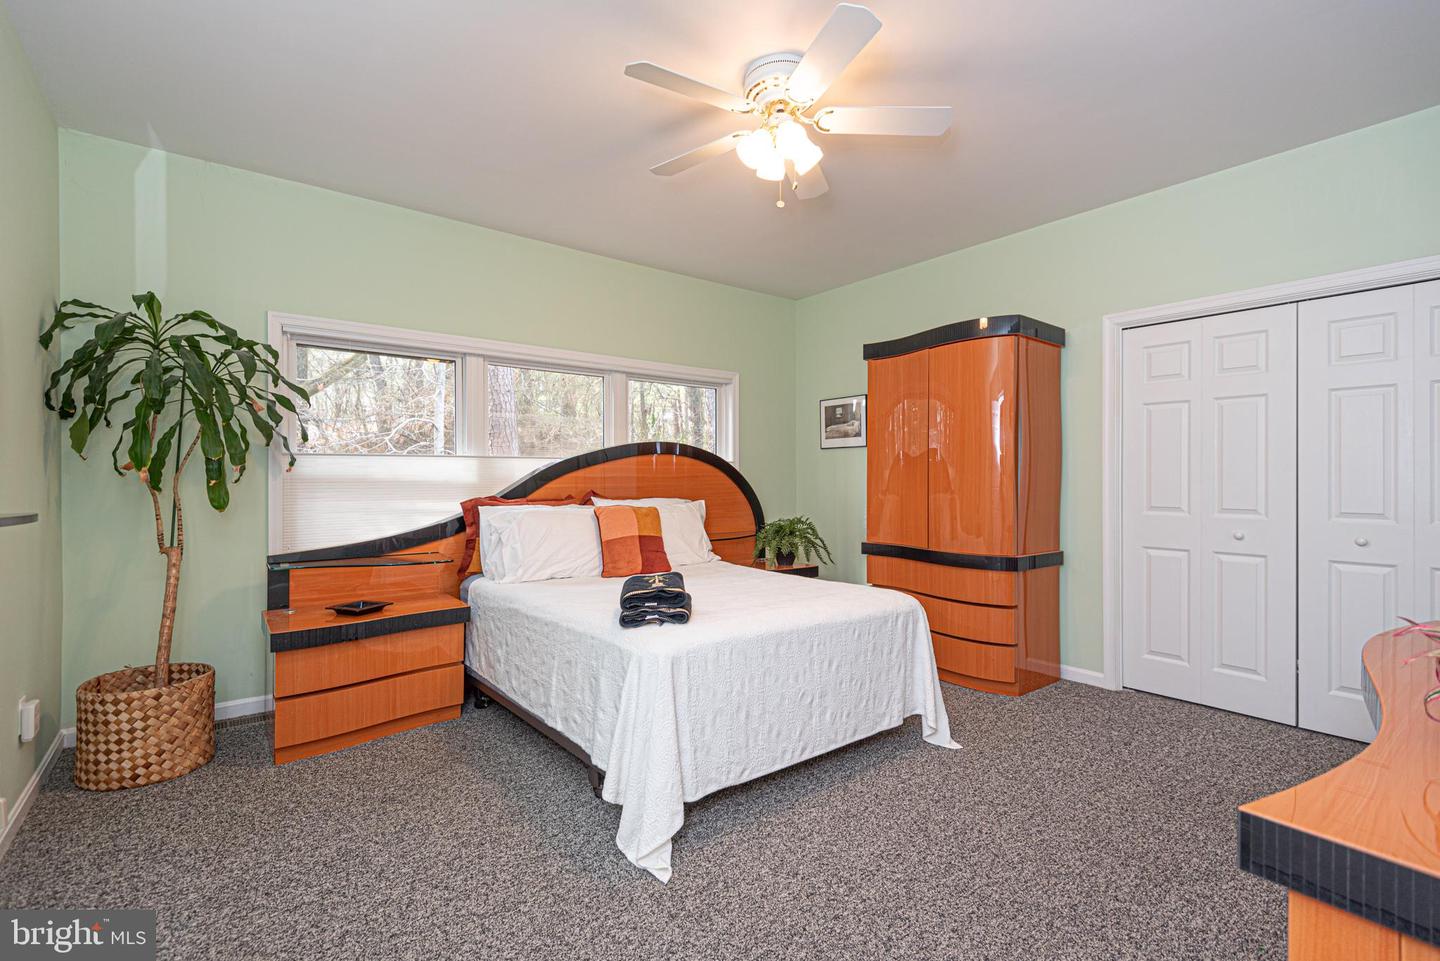 MDWO2019426-802903999276-2024-03-08-00-14-49 106 Pine Forest Dr | Berlin, MD Real Estate For Sale | MLS# Mdwo2019426  - 1st Choice Properties